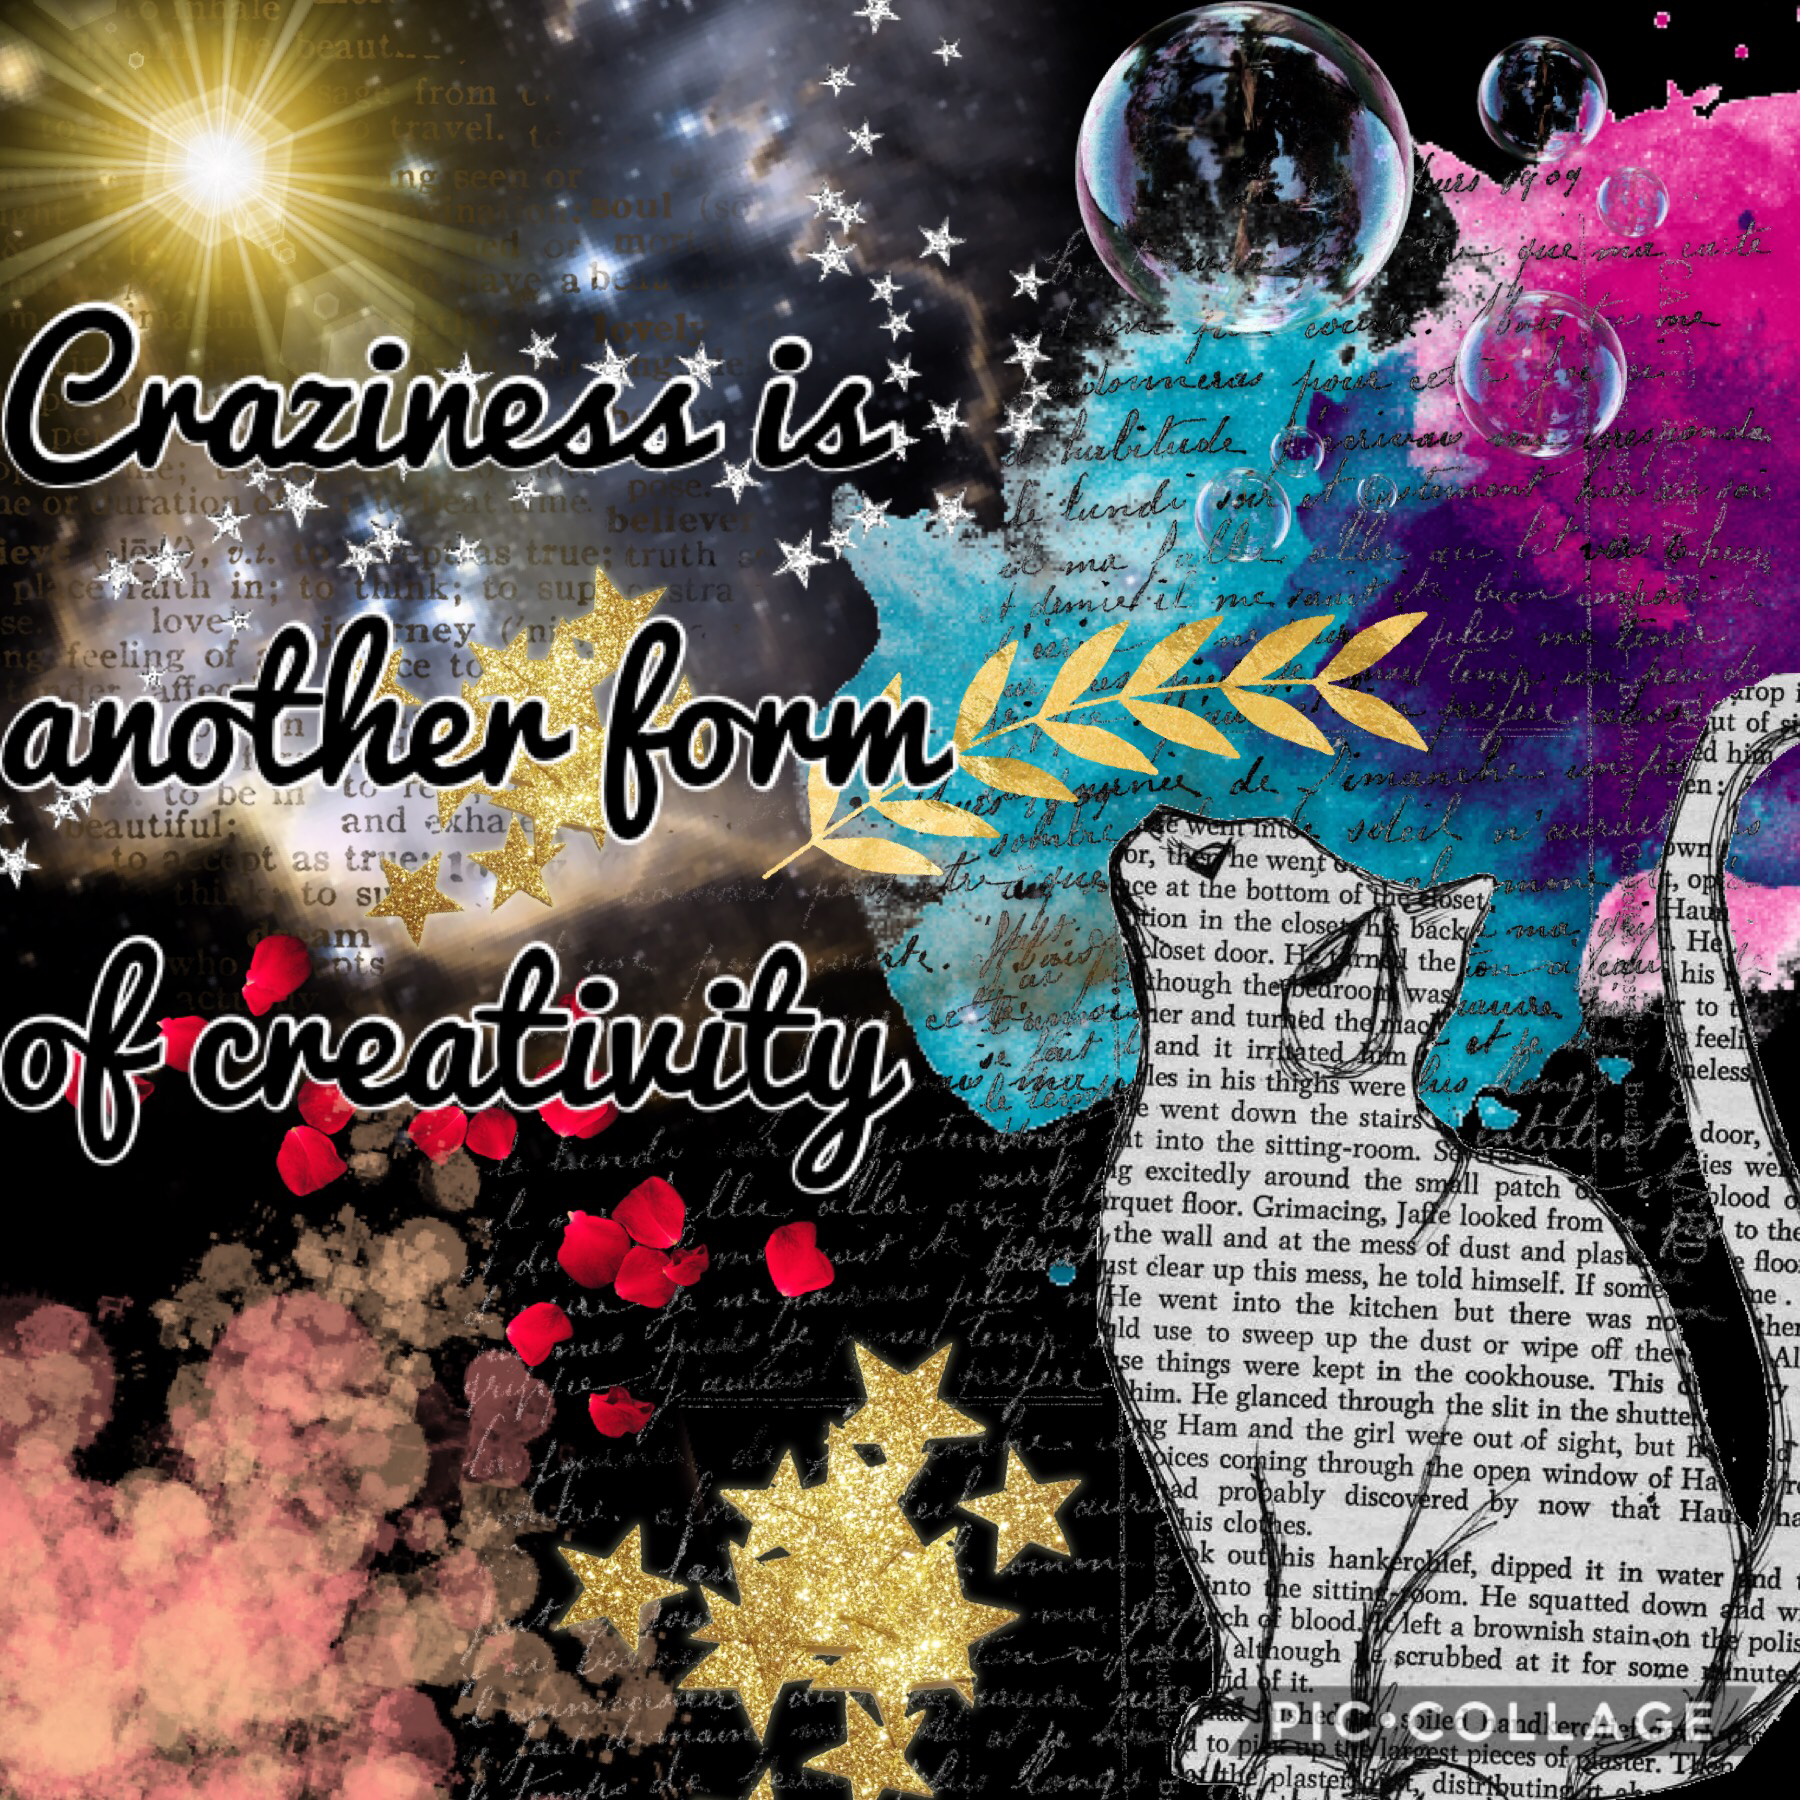 Craziness is another form of creativity 🌸